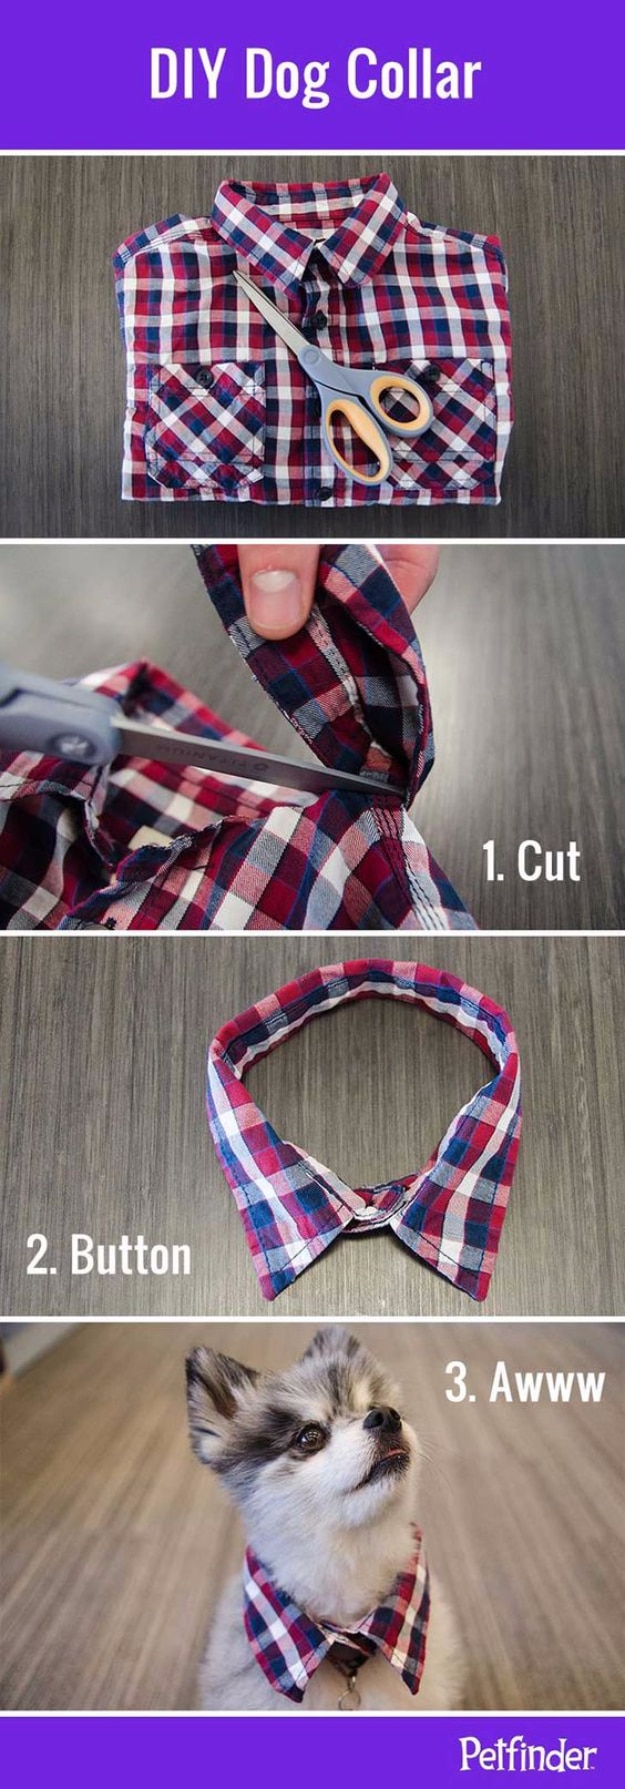 DIY Dog Hacks - DIY Dog Collar - Training Tips, Ideas for Dog Beds and Toys, Homemade Remedies for Fleas and Scratching - Do It Yourself Dog Treat Recips, Food and Gear for Your Pet #dogs #diy #crafts